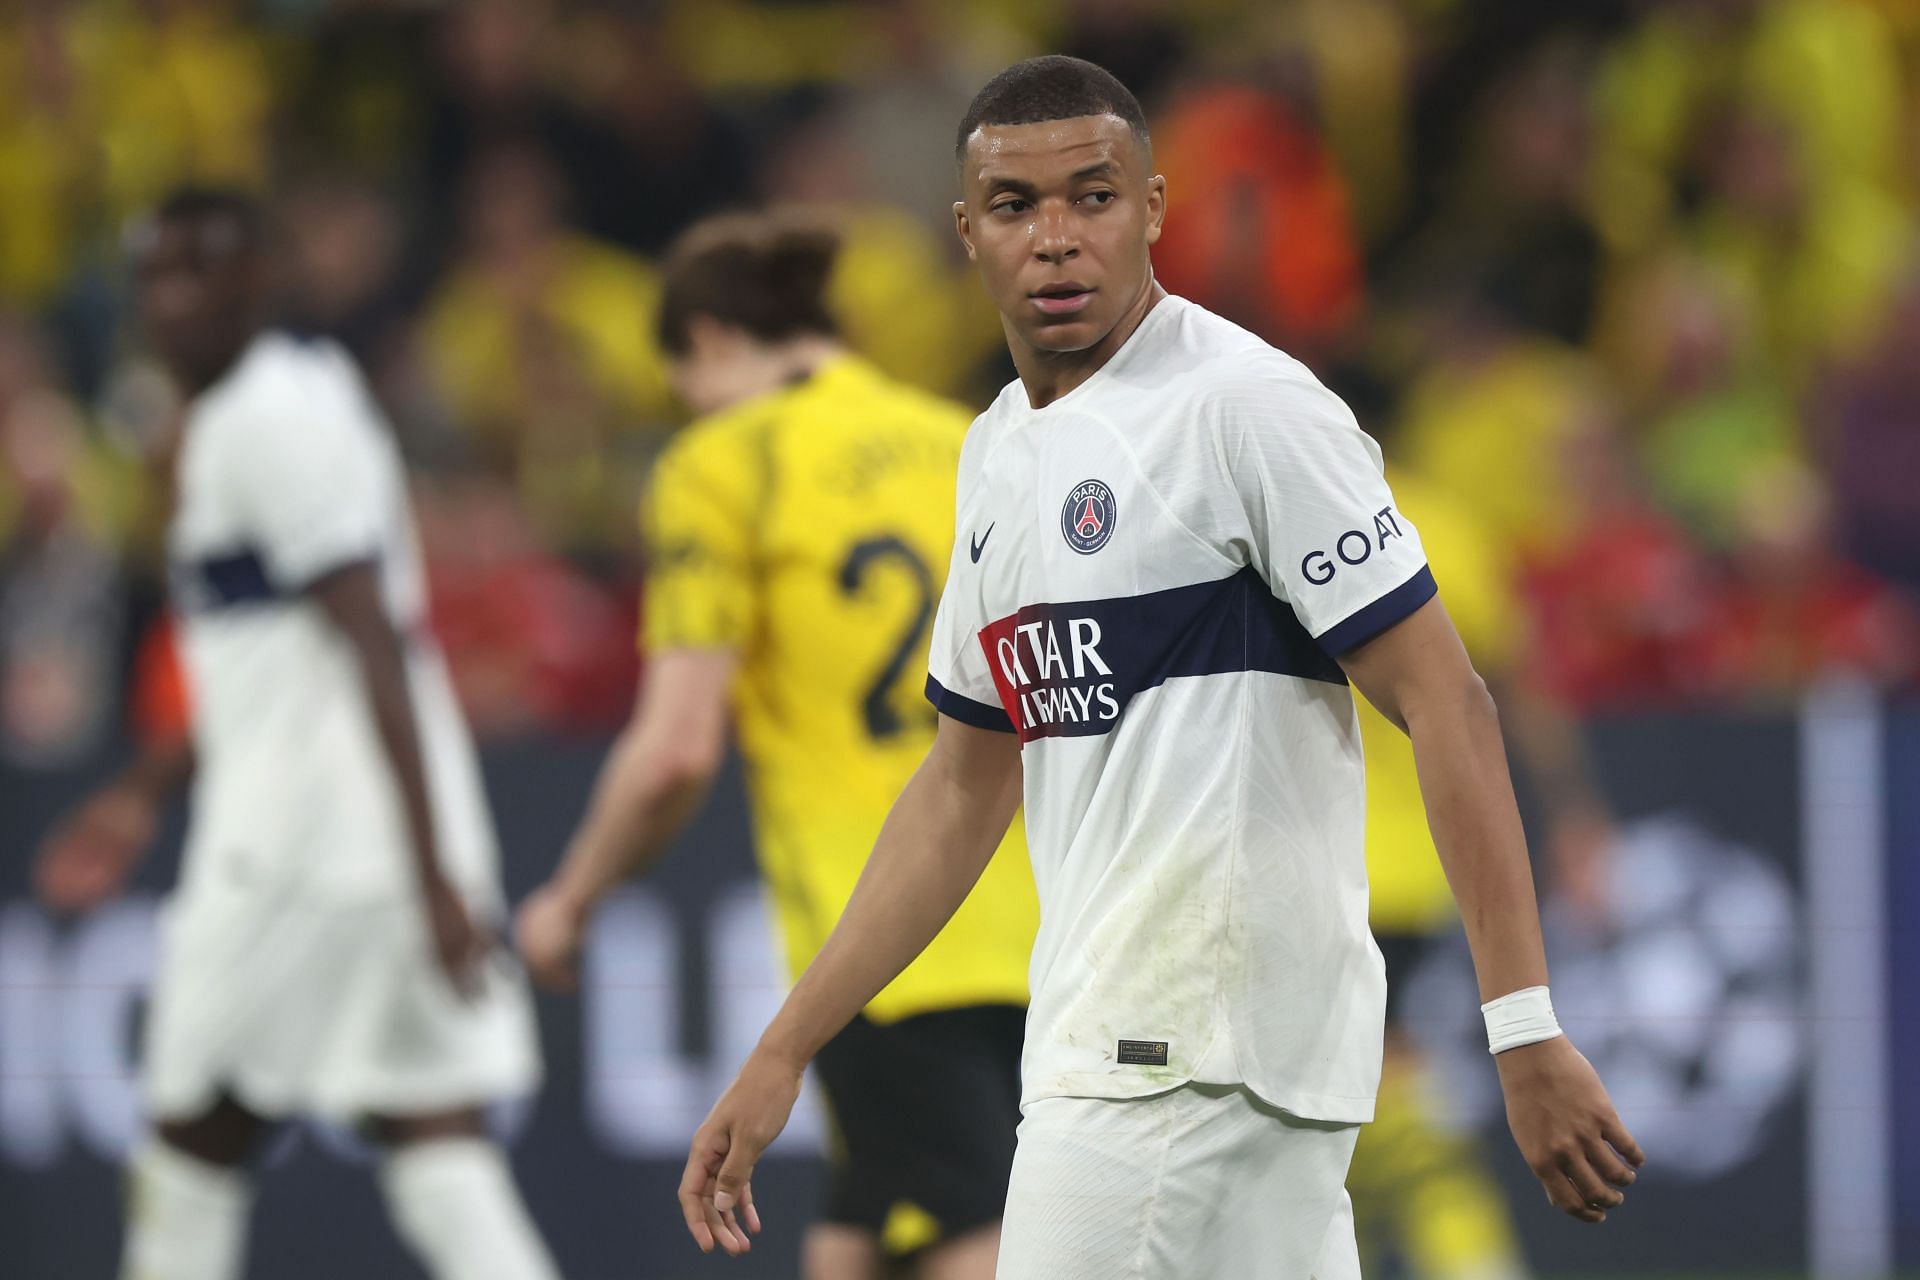 Kylian Mbappe is widely expected to arrive at the Santiago Bernabeu this summer